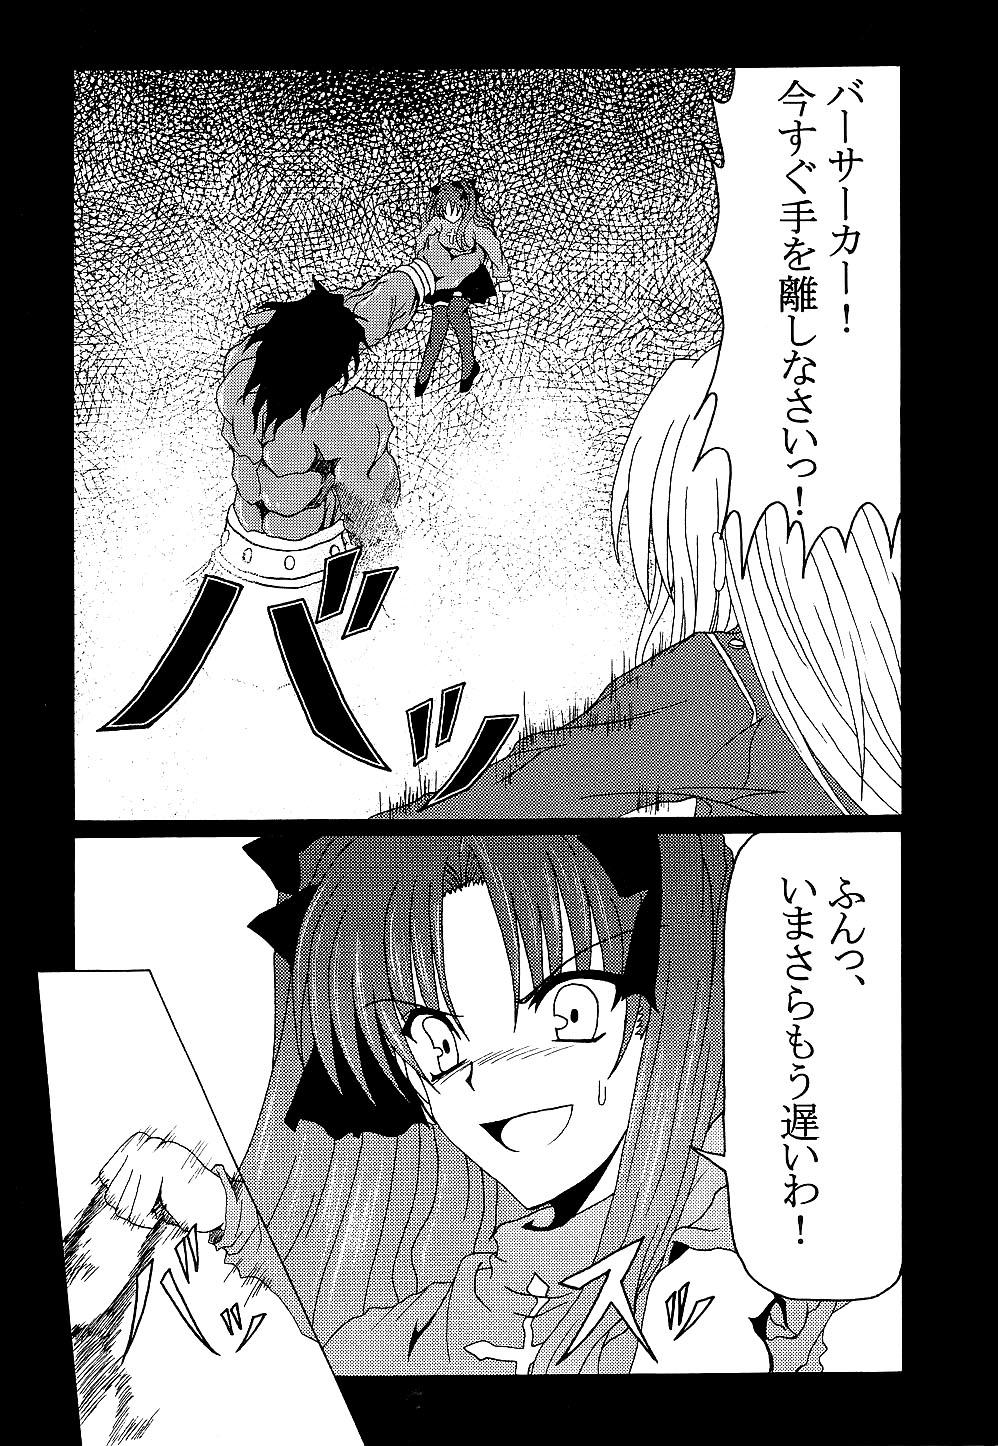 Gay Sex Fate na Kankei - Fate stay night Real Amateur Porn - Page 9